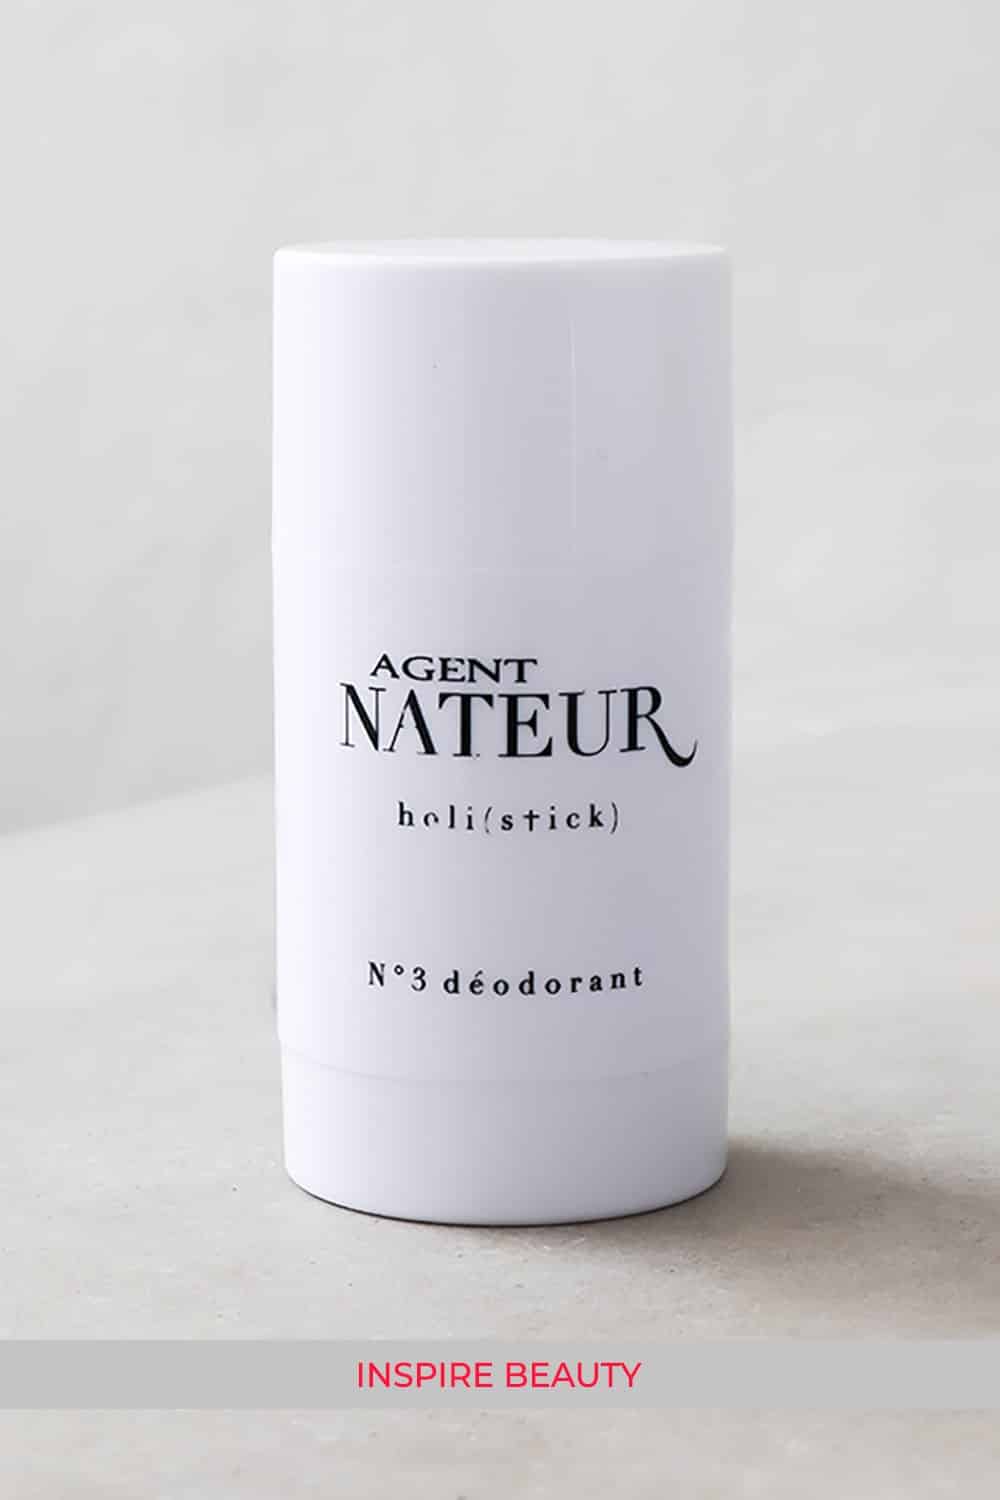 Review of Agent Nateur Holi(Stick) No.3 Deodorant, all natural deodorant with a fresh scent